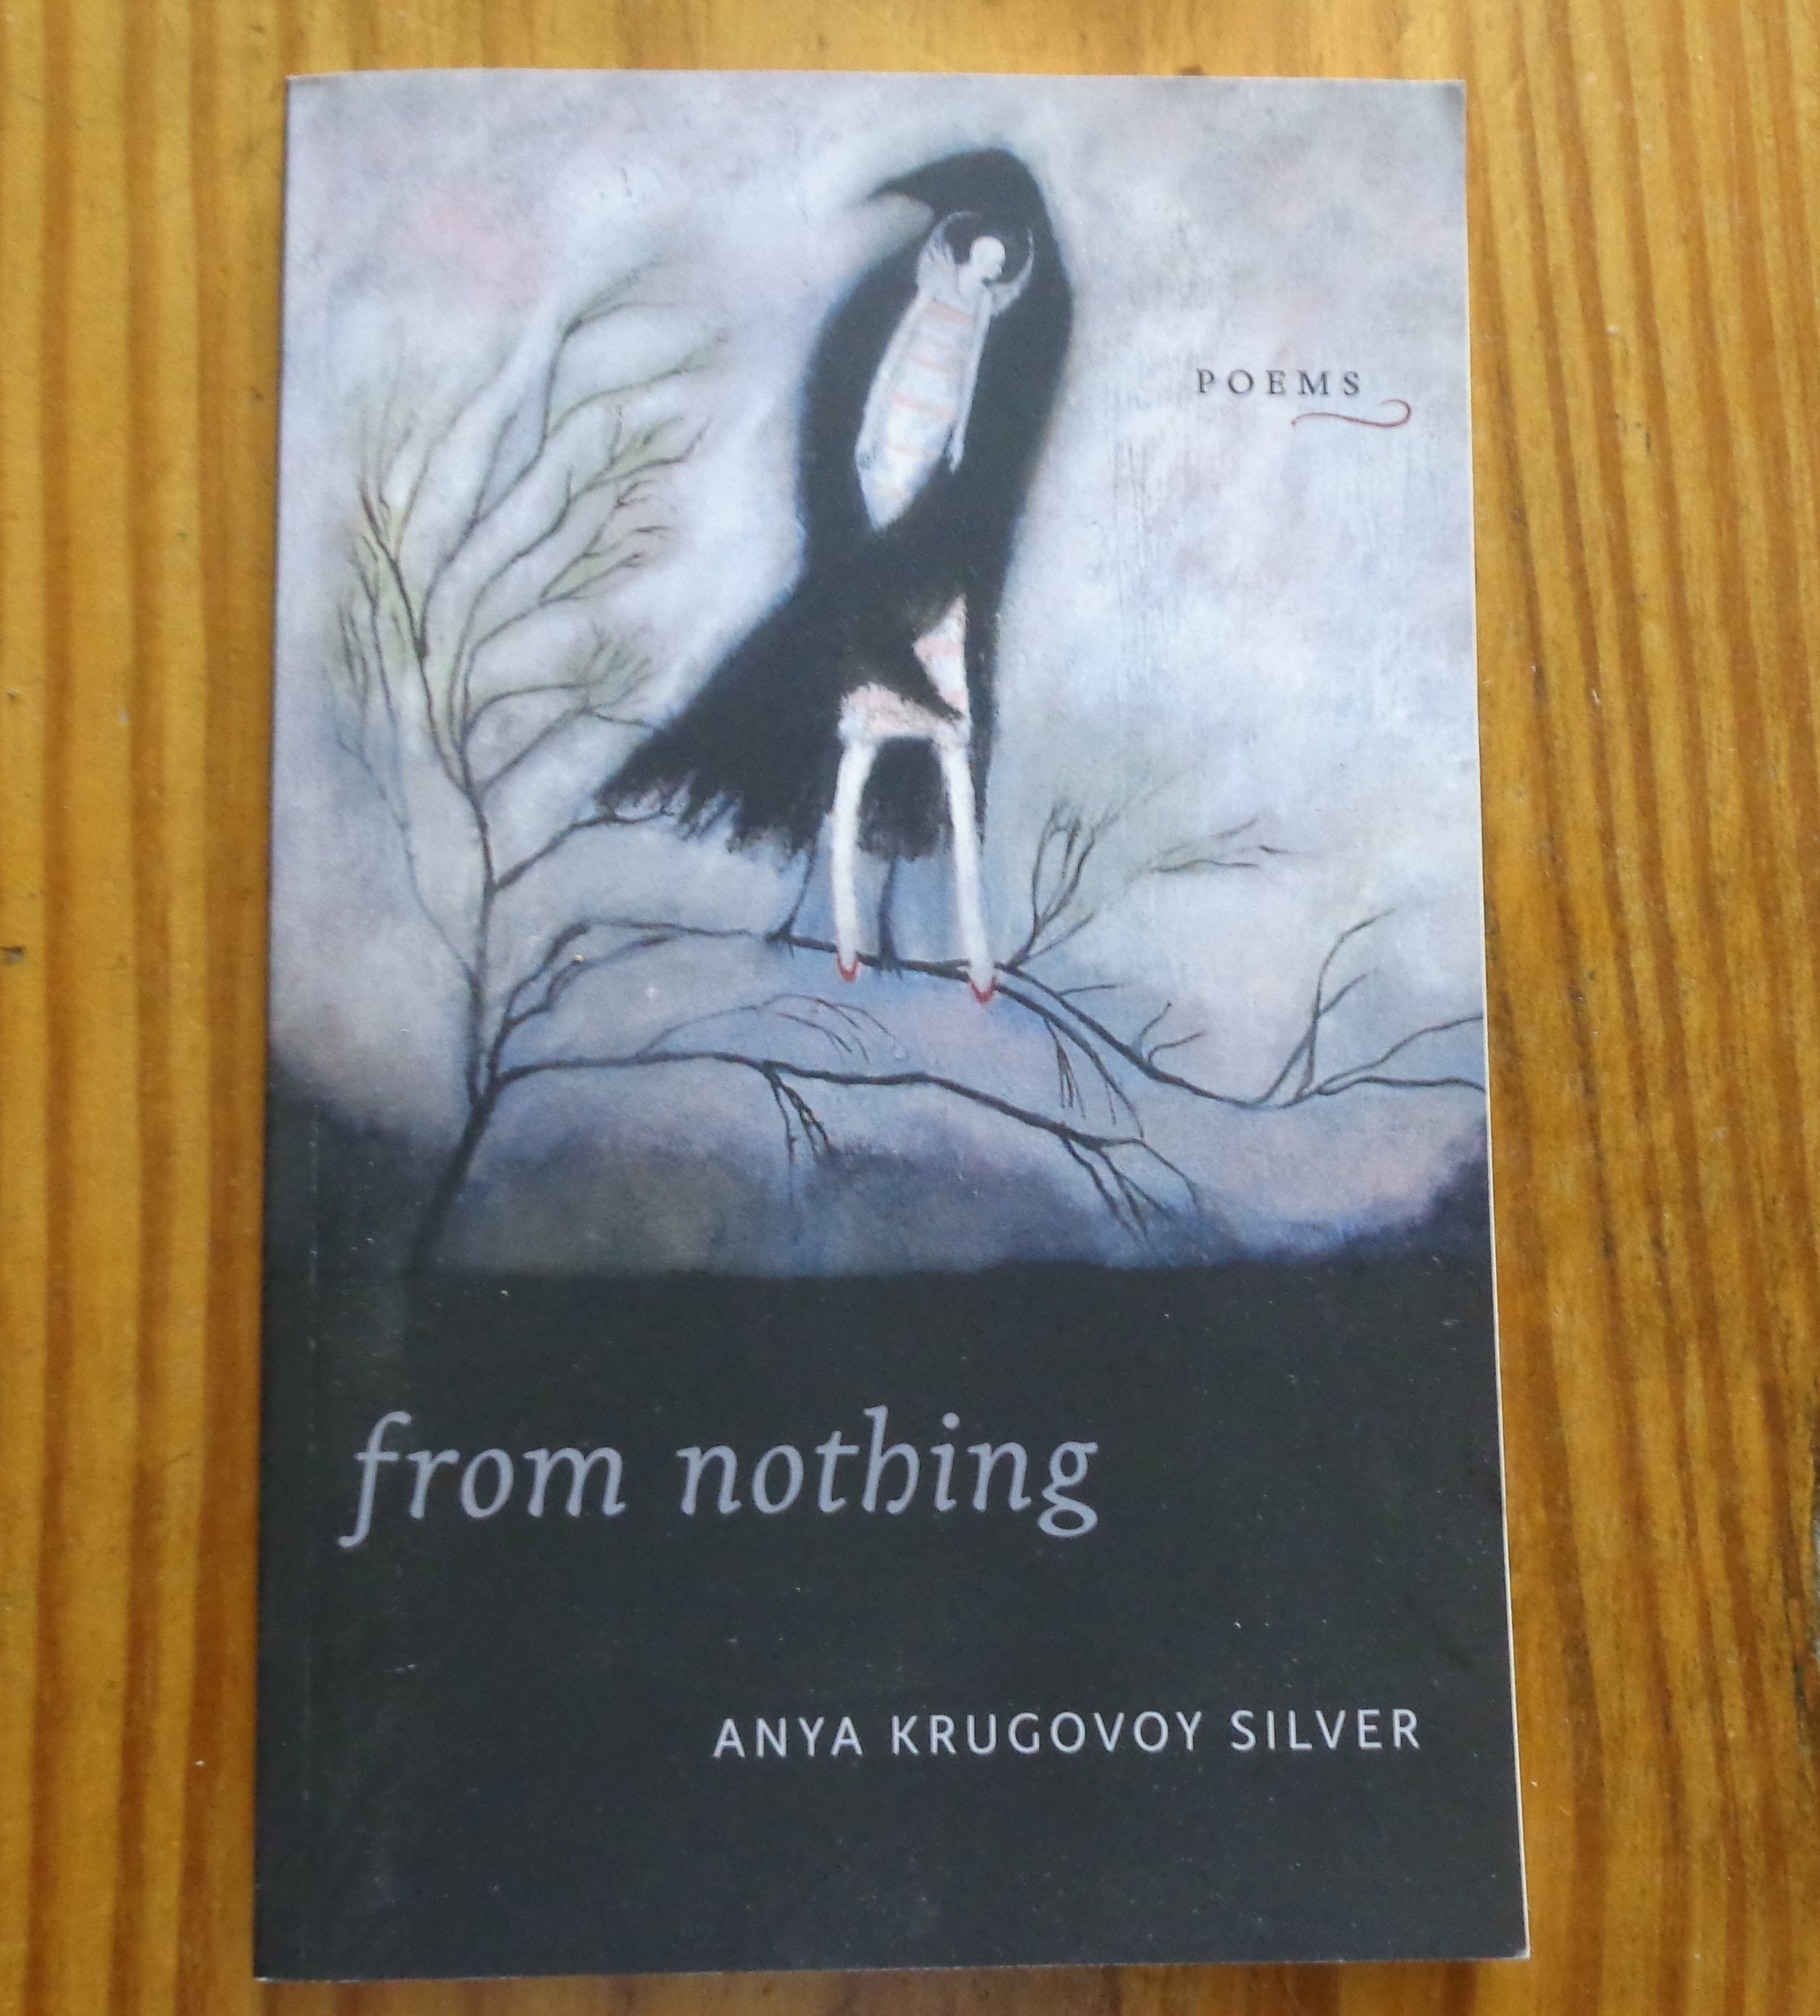 Cover Art for "From Nothing", poetry by Anna Krugovoy Silver